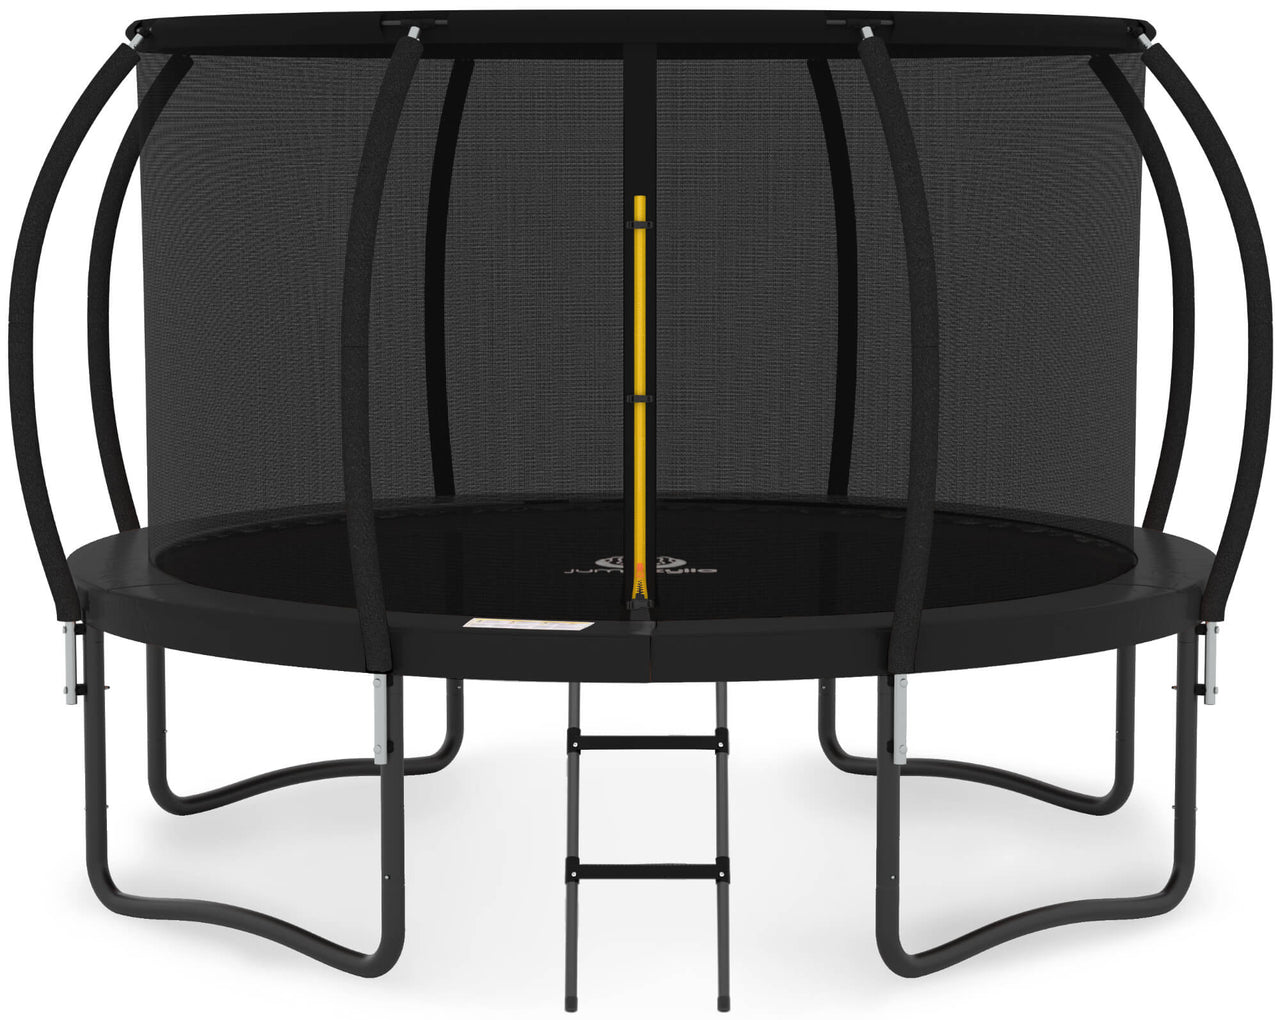 Jumpzylla 14FT Trampoline with Enclosure & Double Color Pad Cover